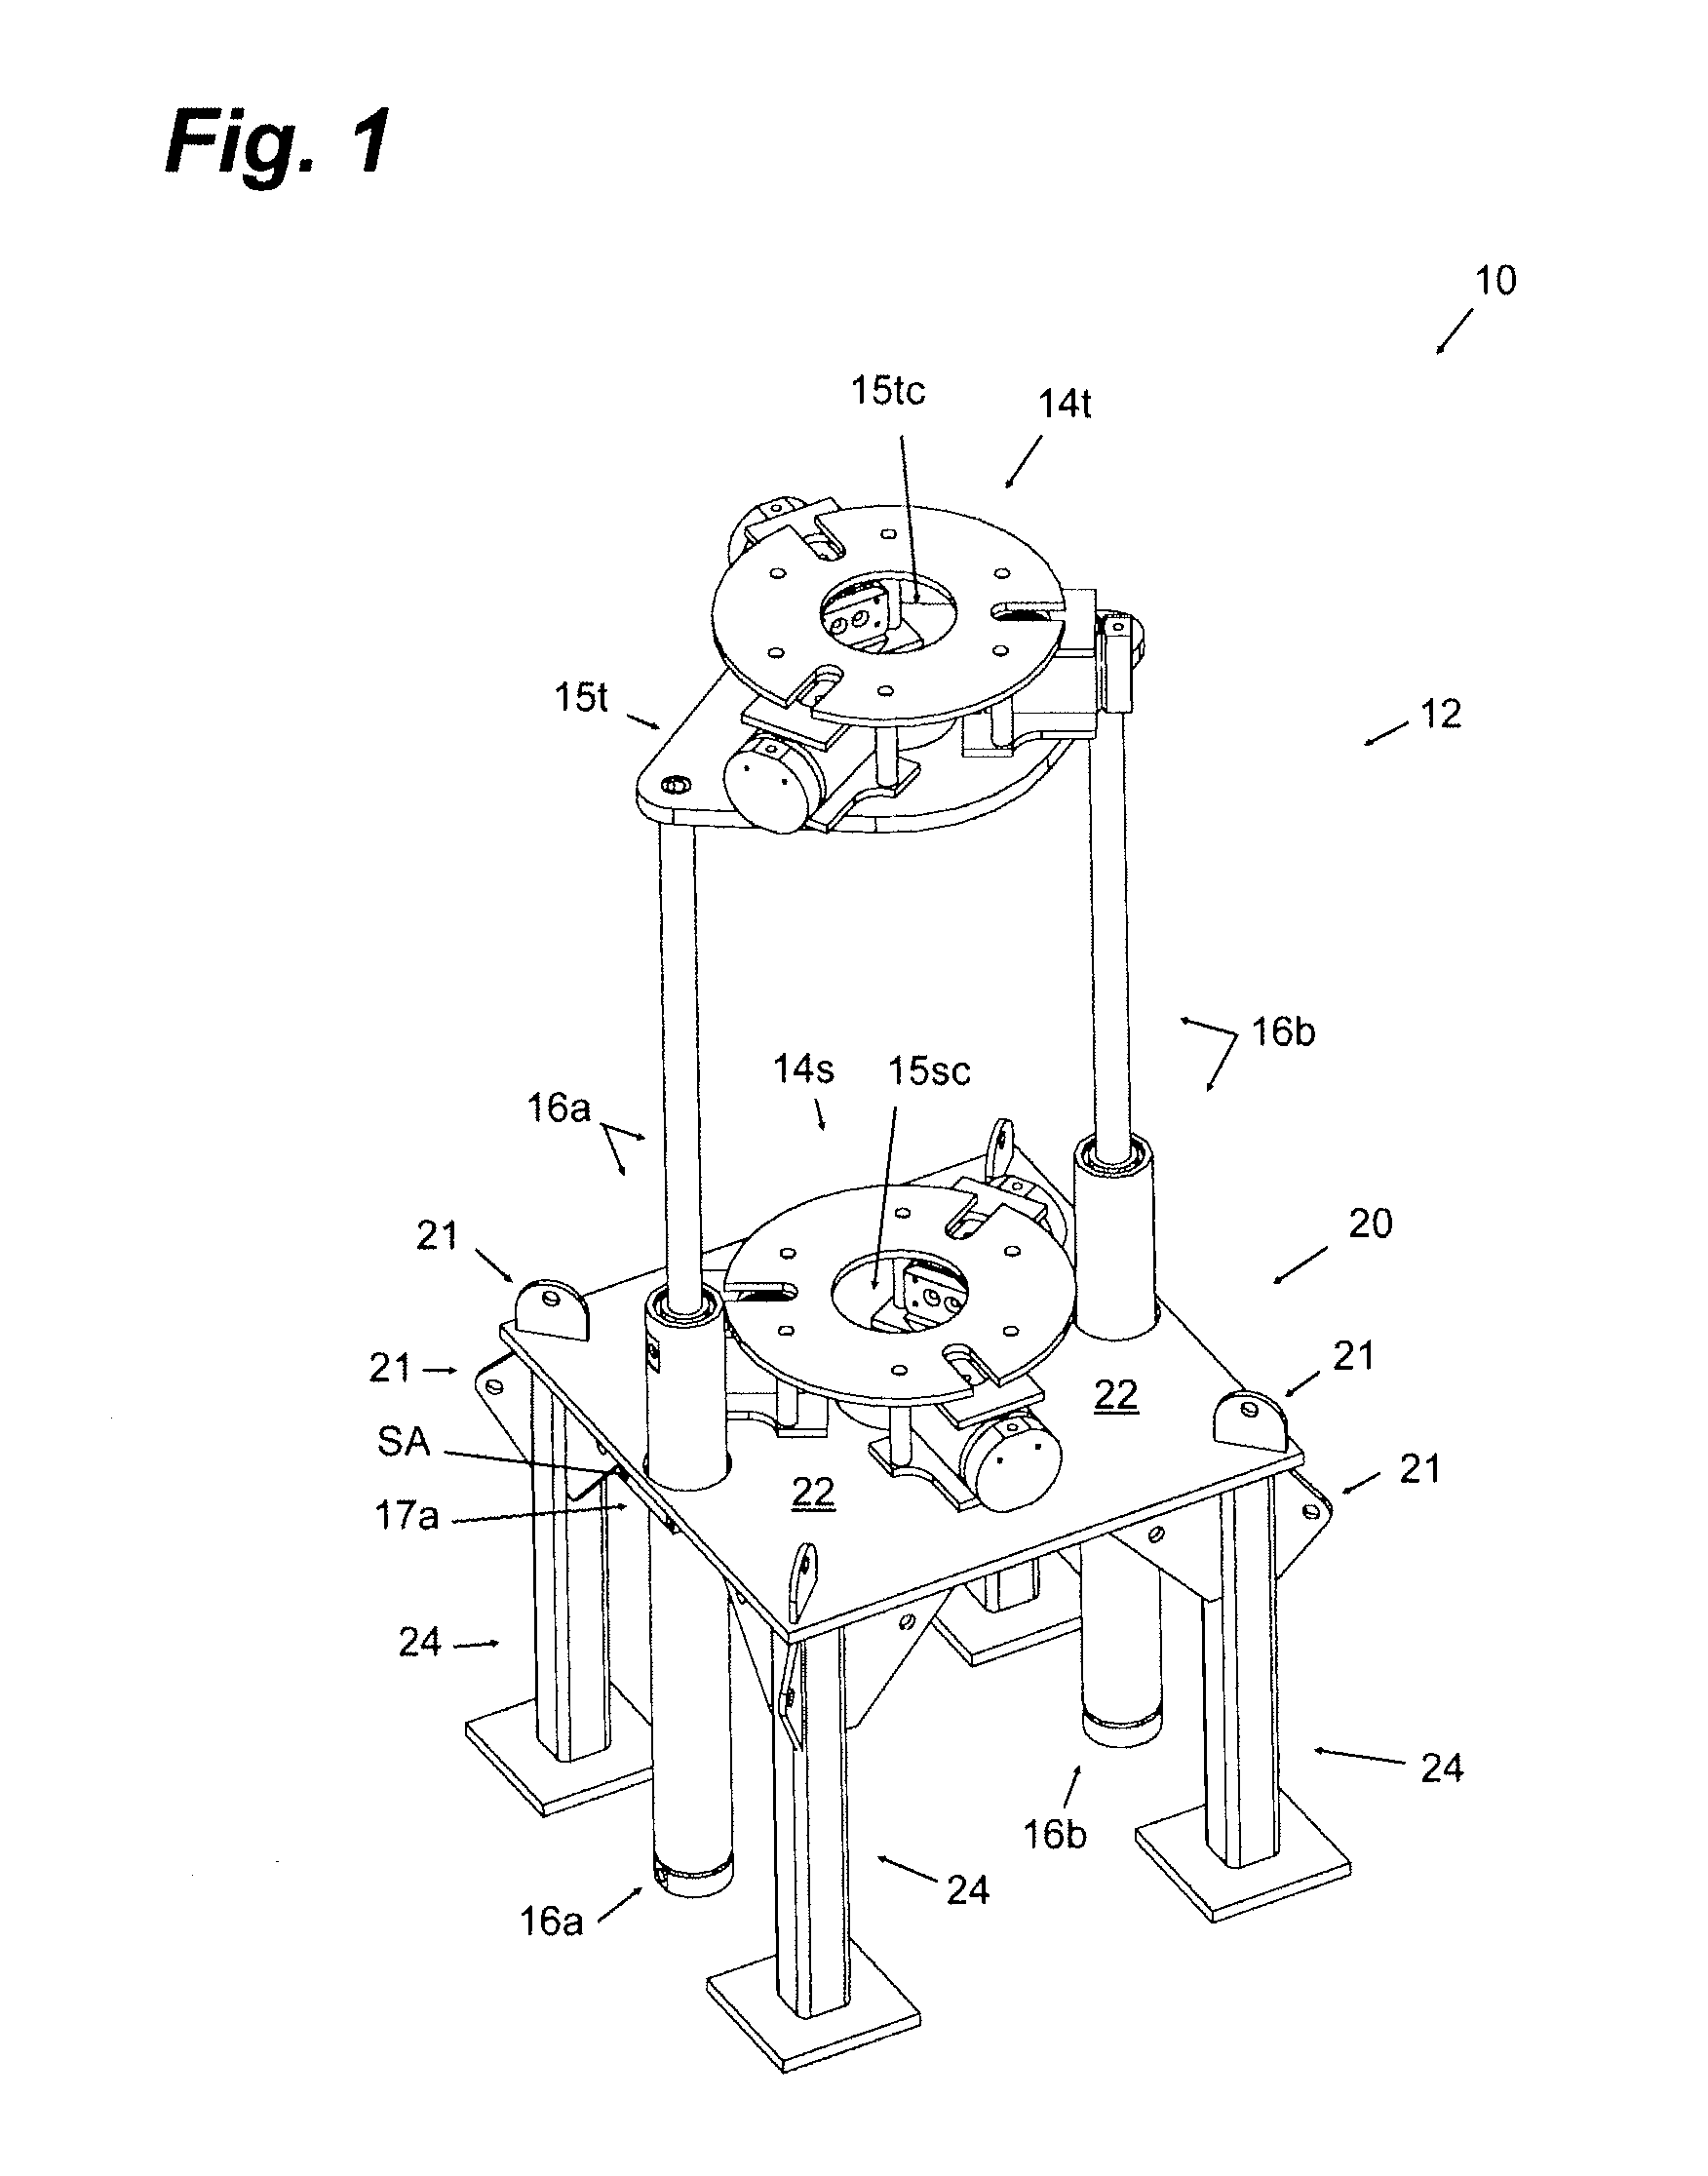 Push / pull system and support structure for snubbing unit or the like on a rig floor